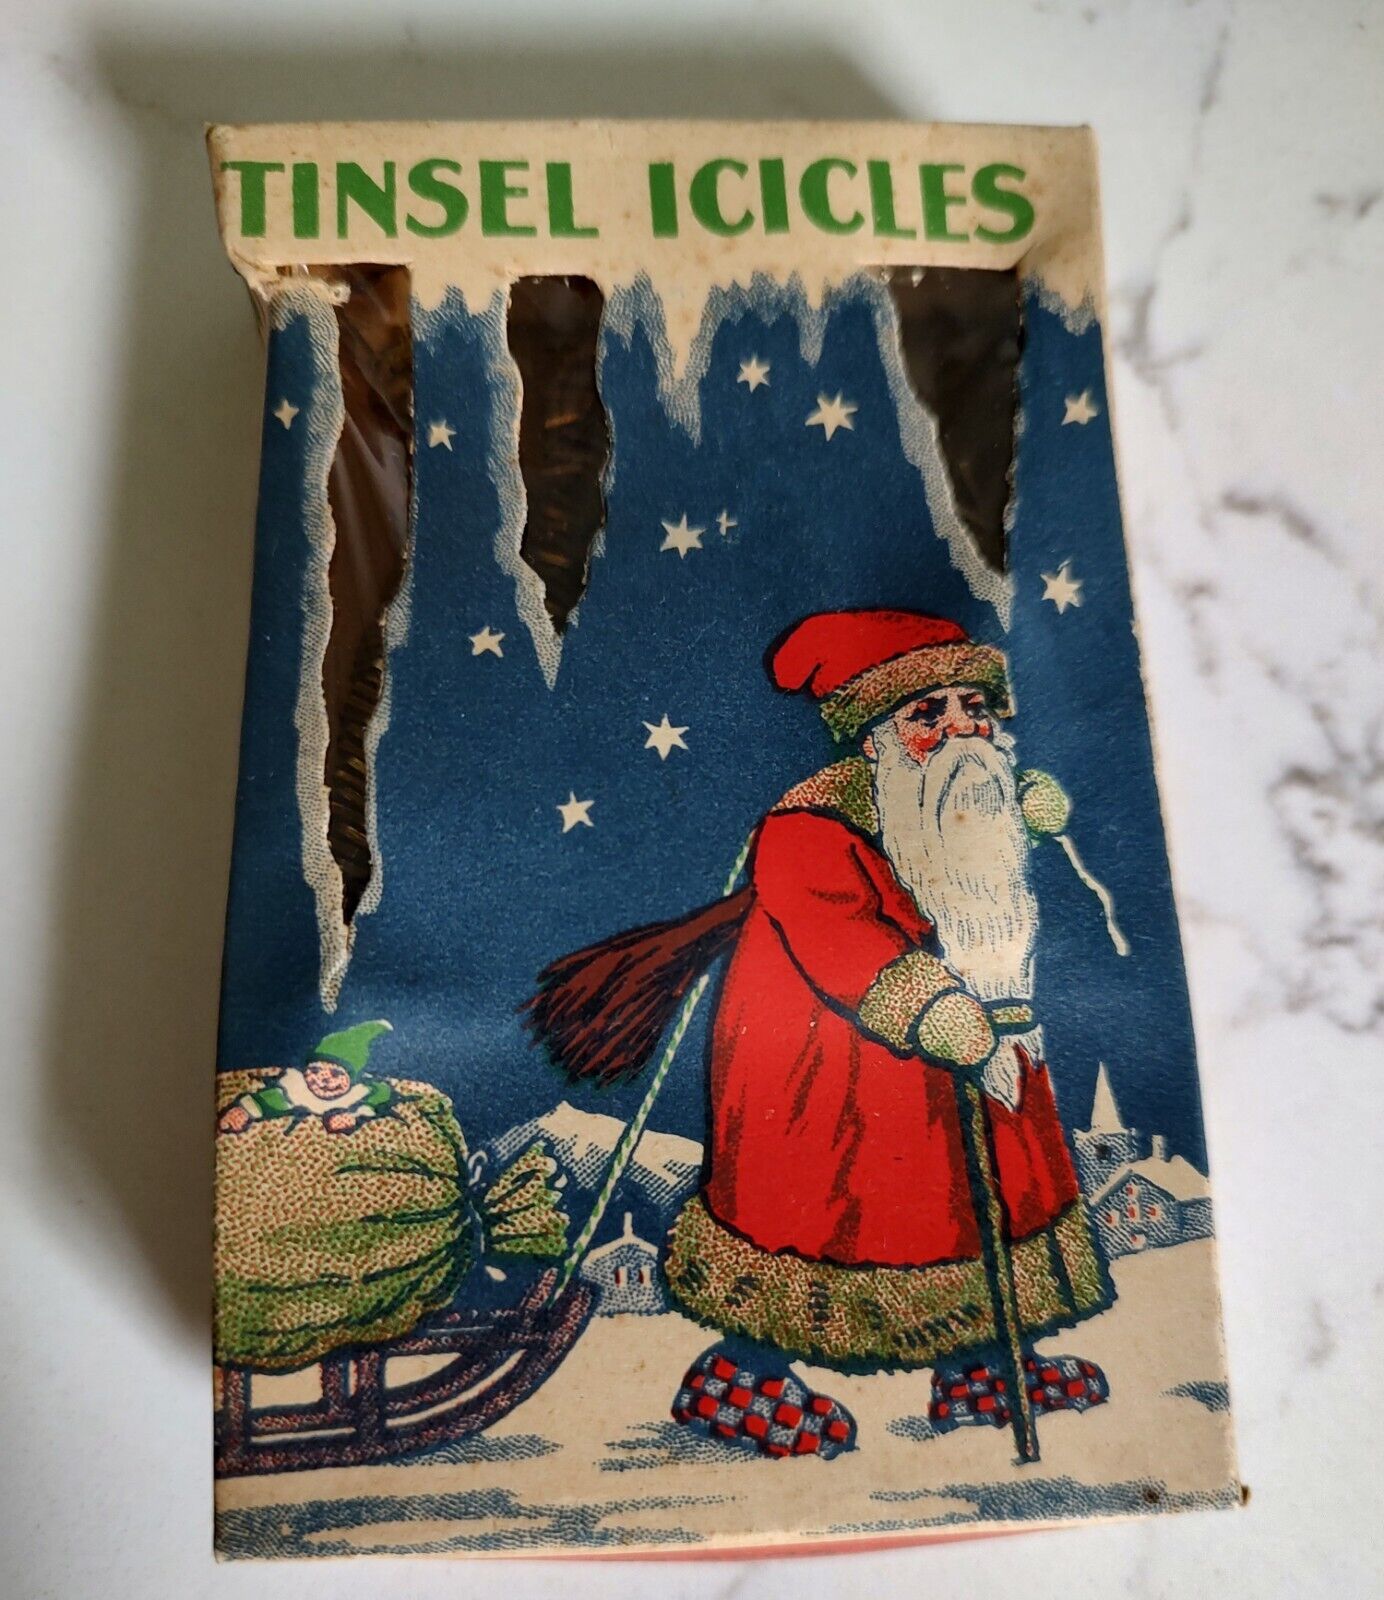 Antique German Tinsel Icicles In Original Box. Not Reproduction.